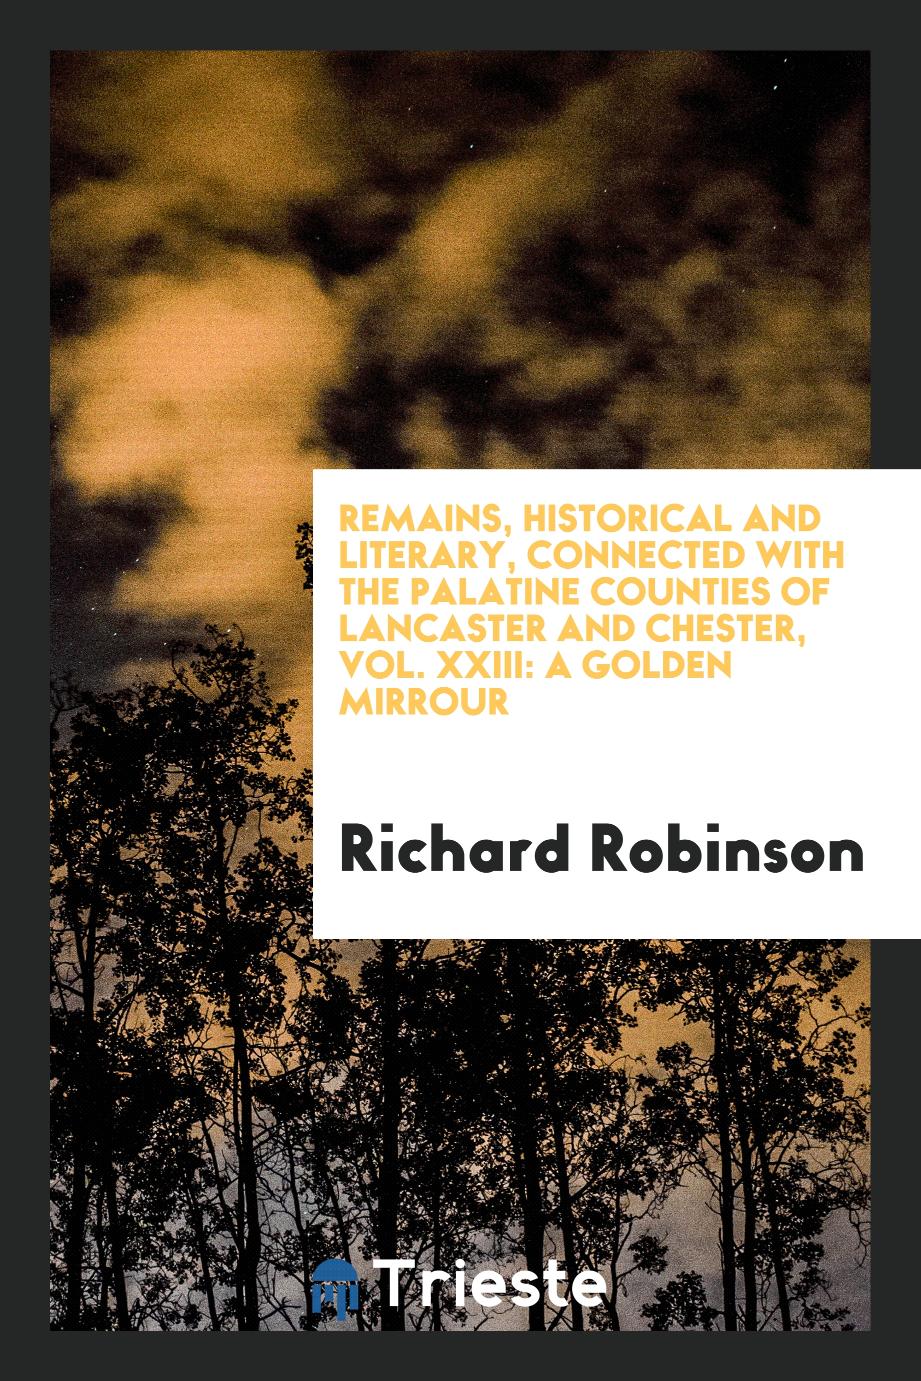 Remains, Historical and Literary, Connected with the Palatine Counties of Lancaster and Chester, Vol. XXIII: A Golden Mirrour